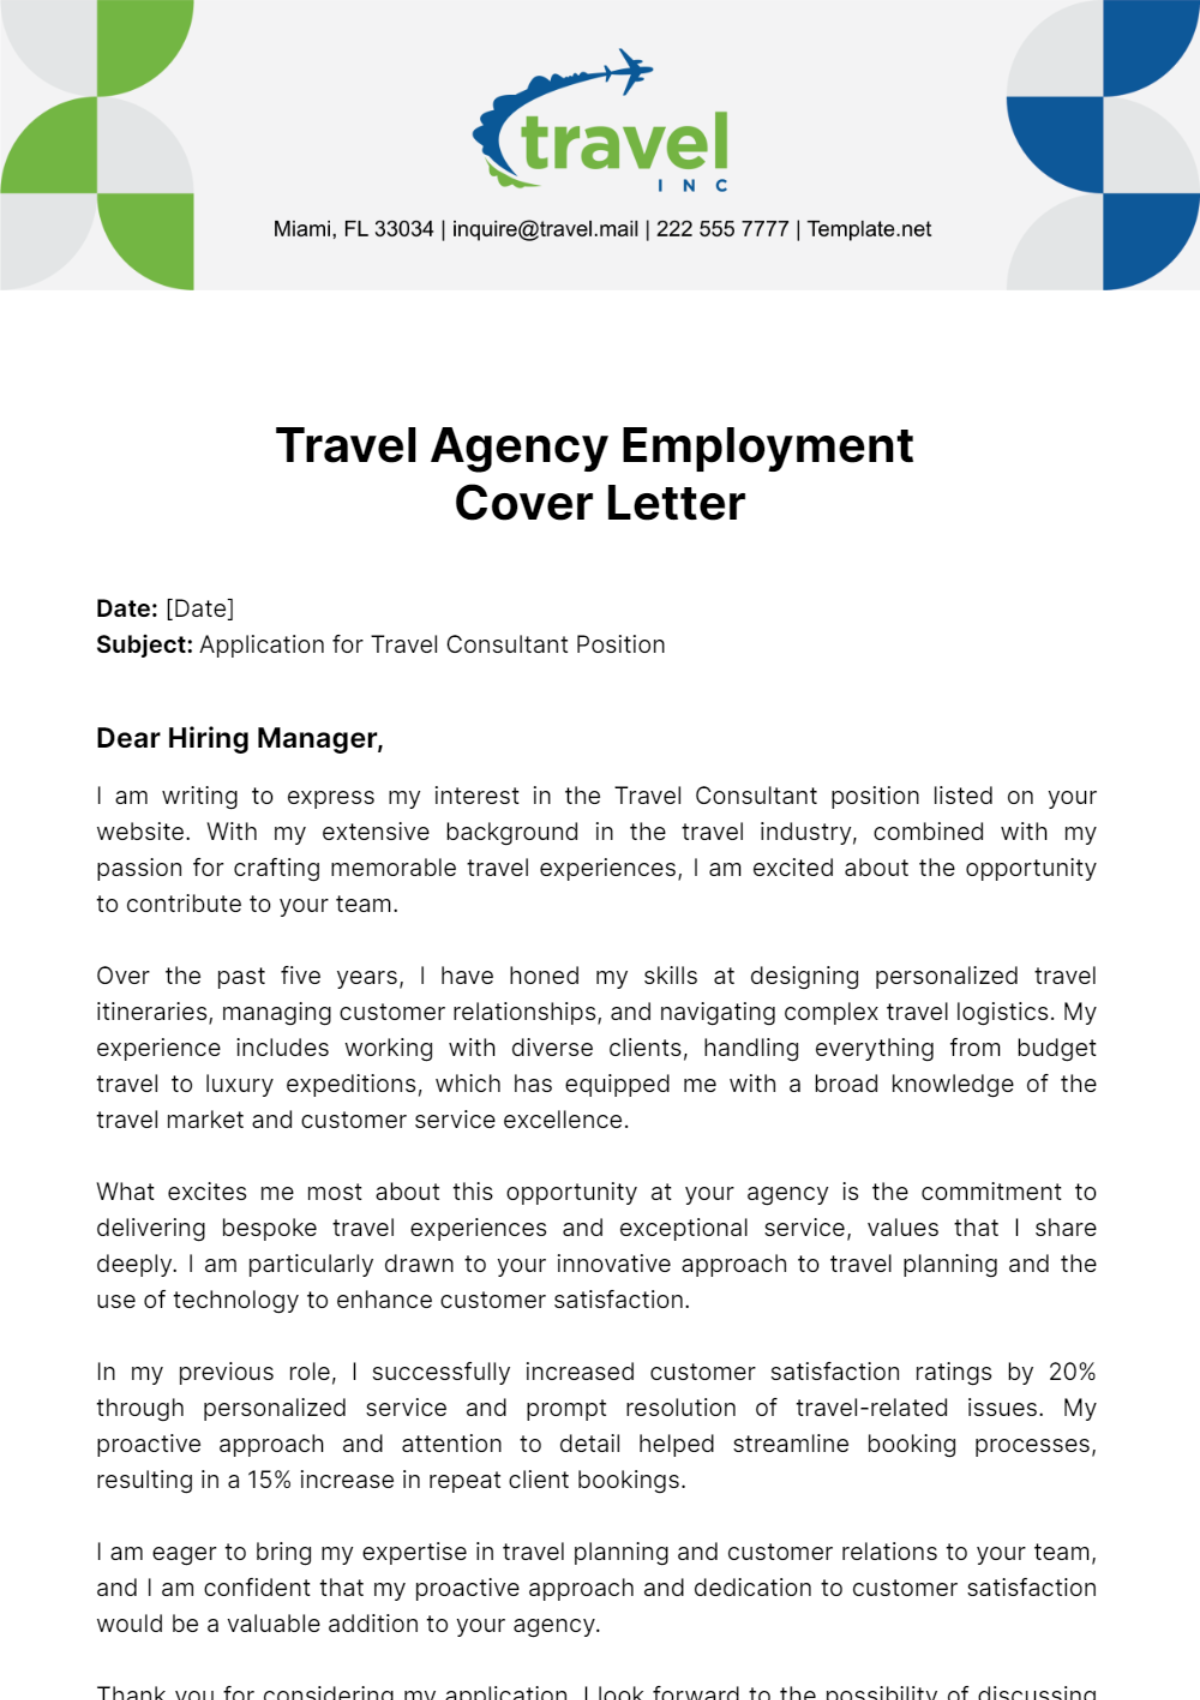 Travel Agency Employment Cover Letter Template